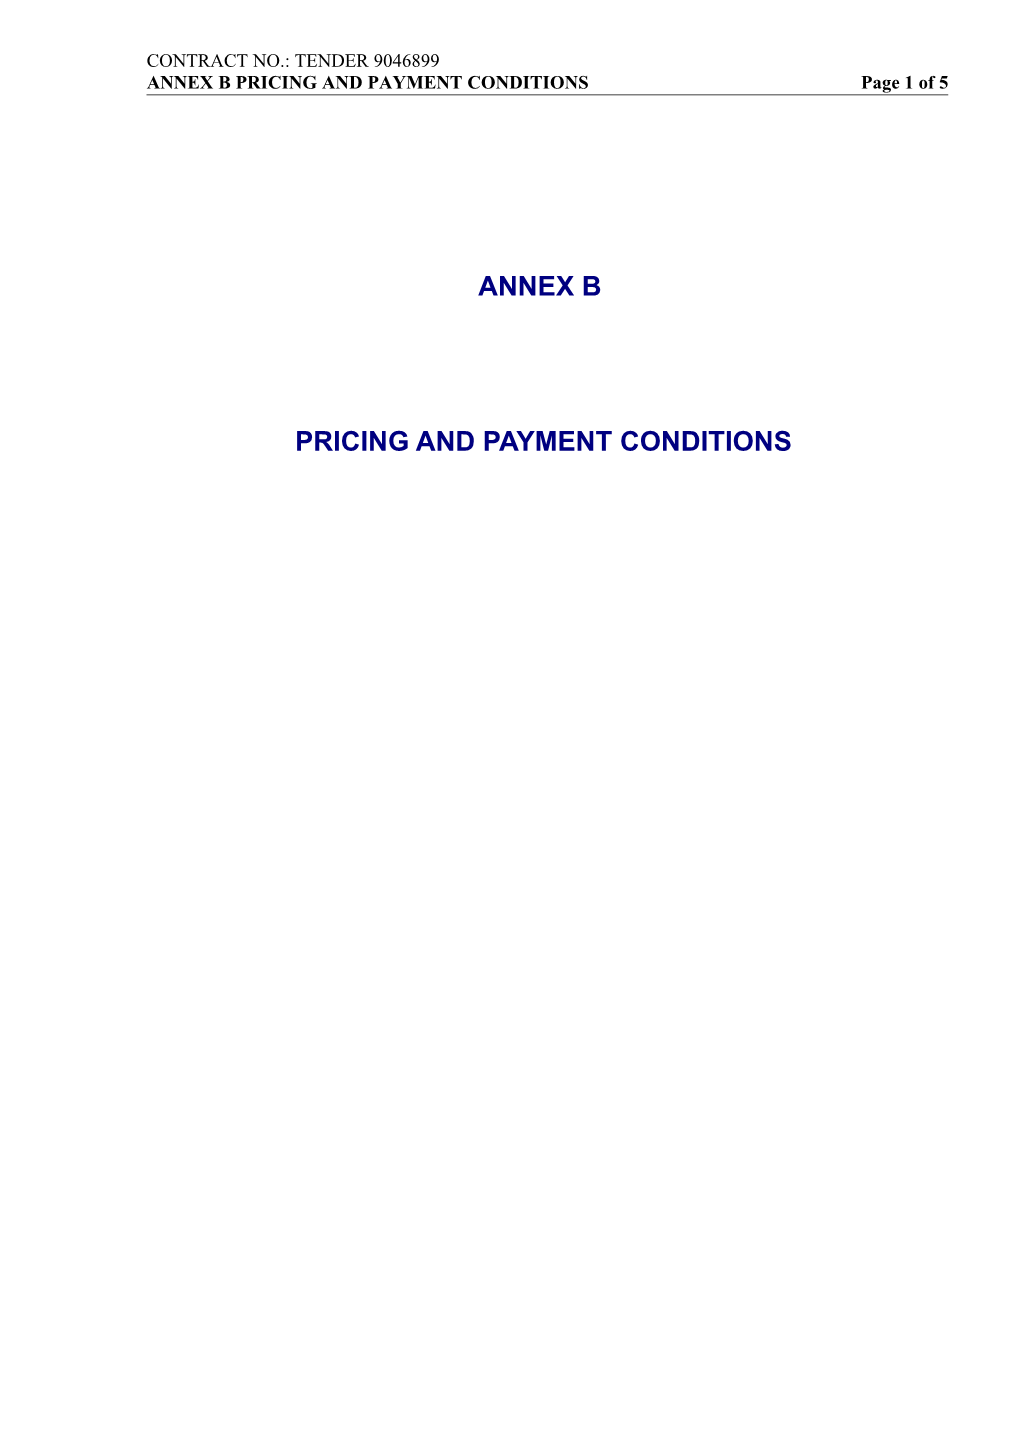 ANNEX B PRICING and PAYMENT Conditionspage 1 of 5